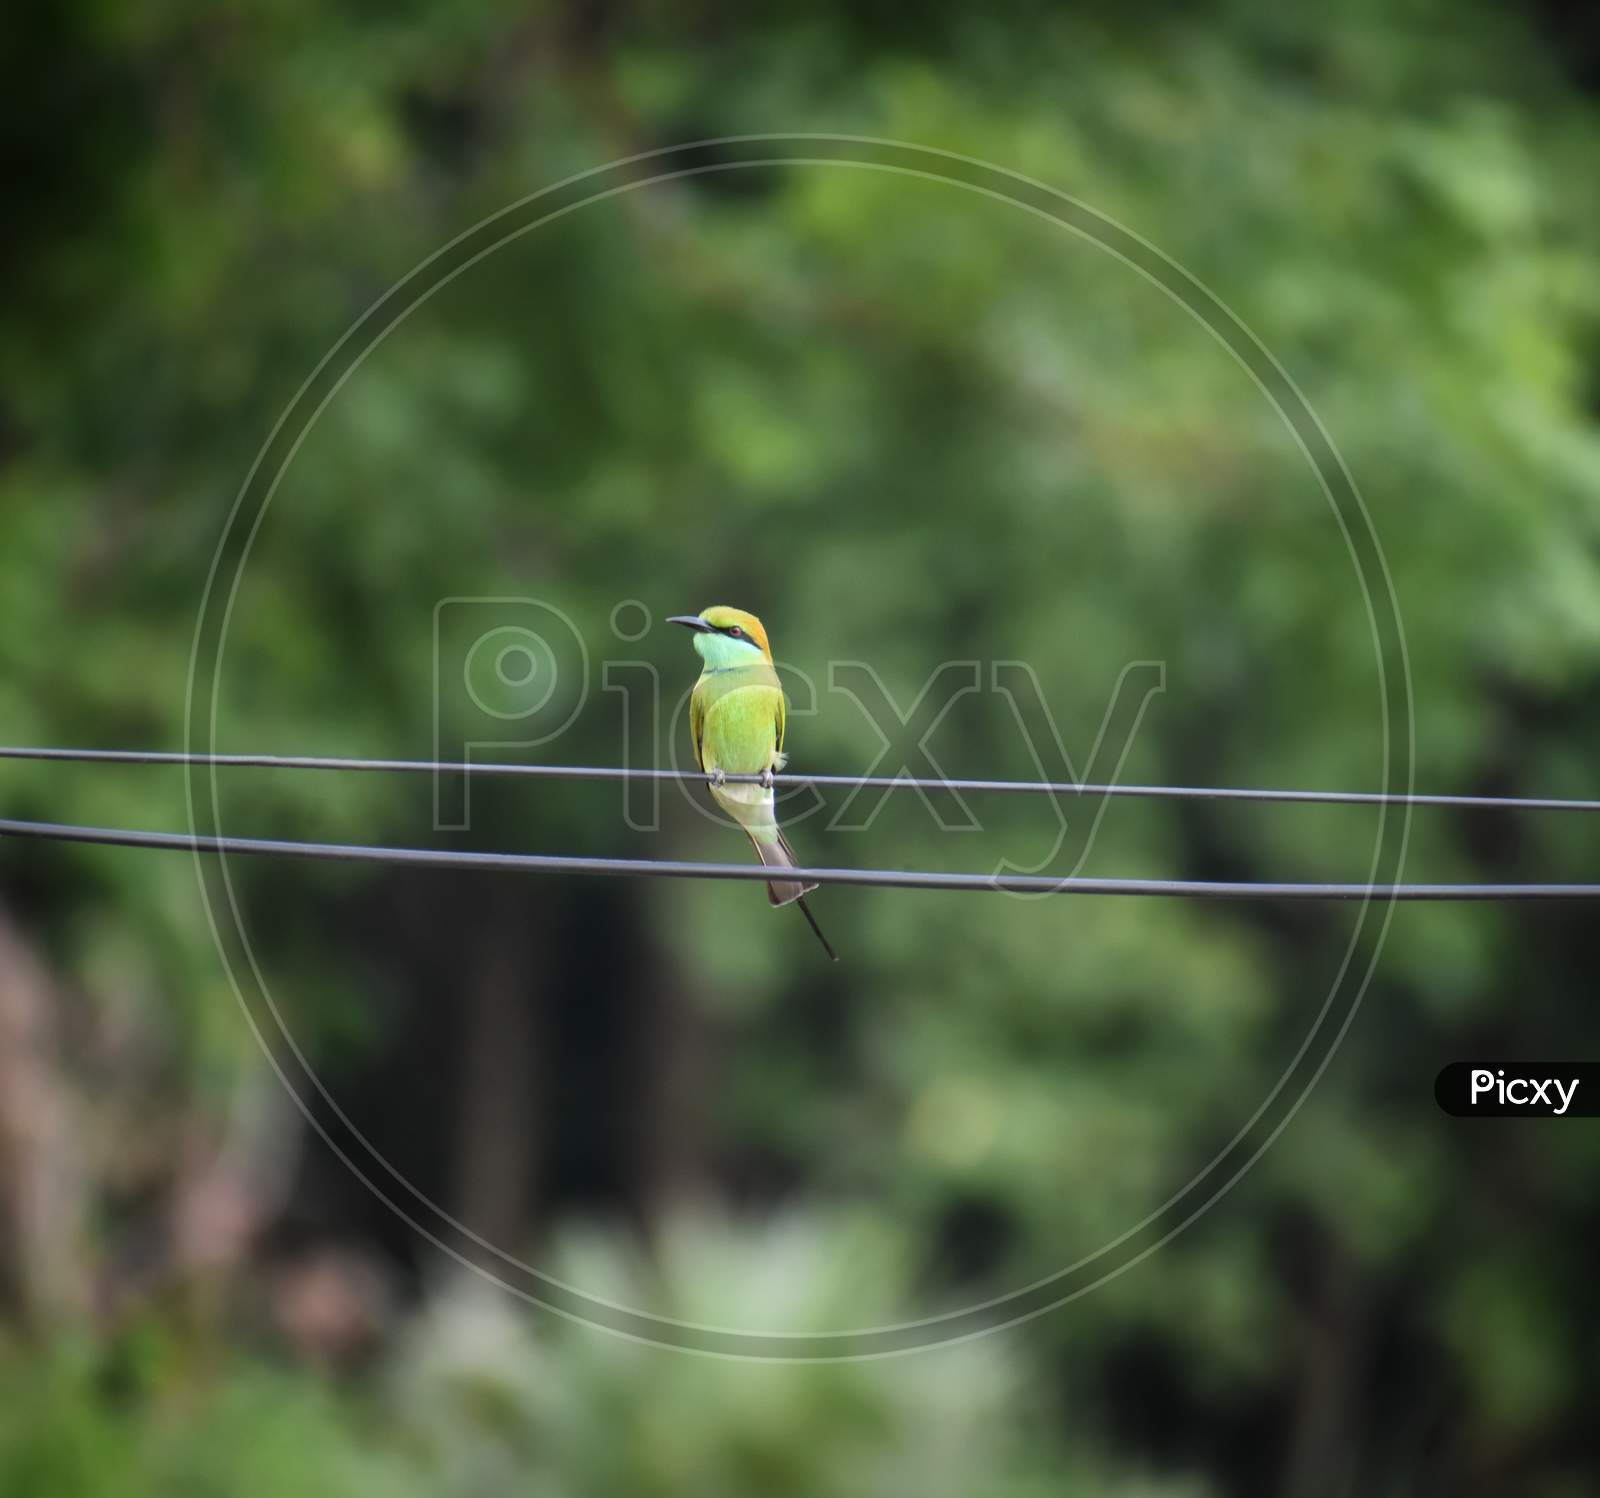 A small green bird sitting on the current wire, india.